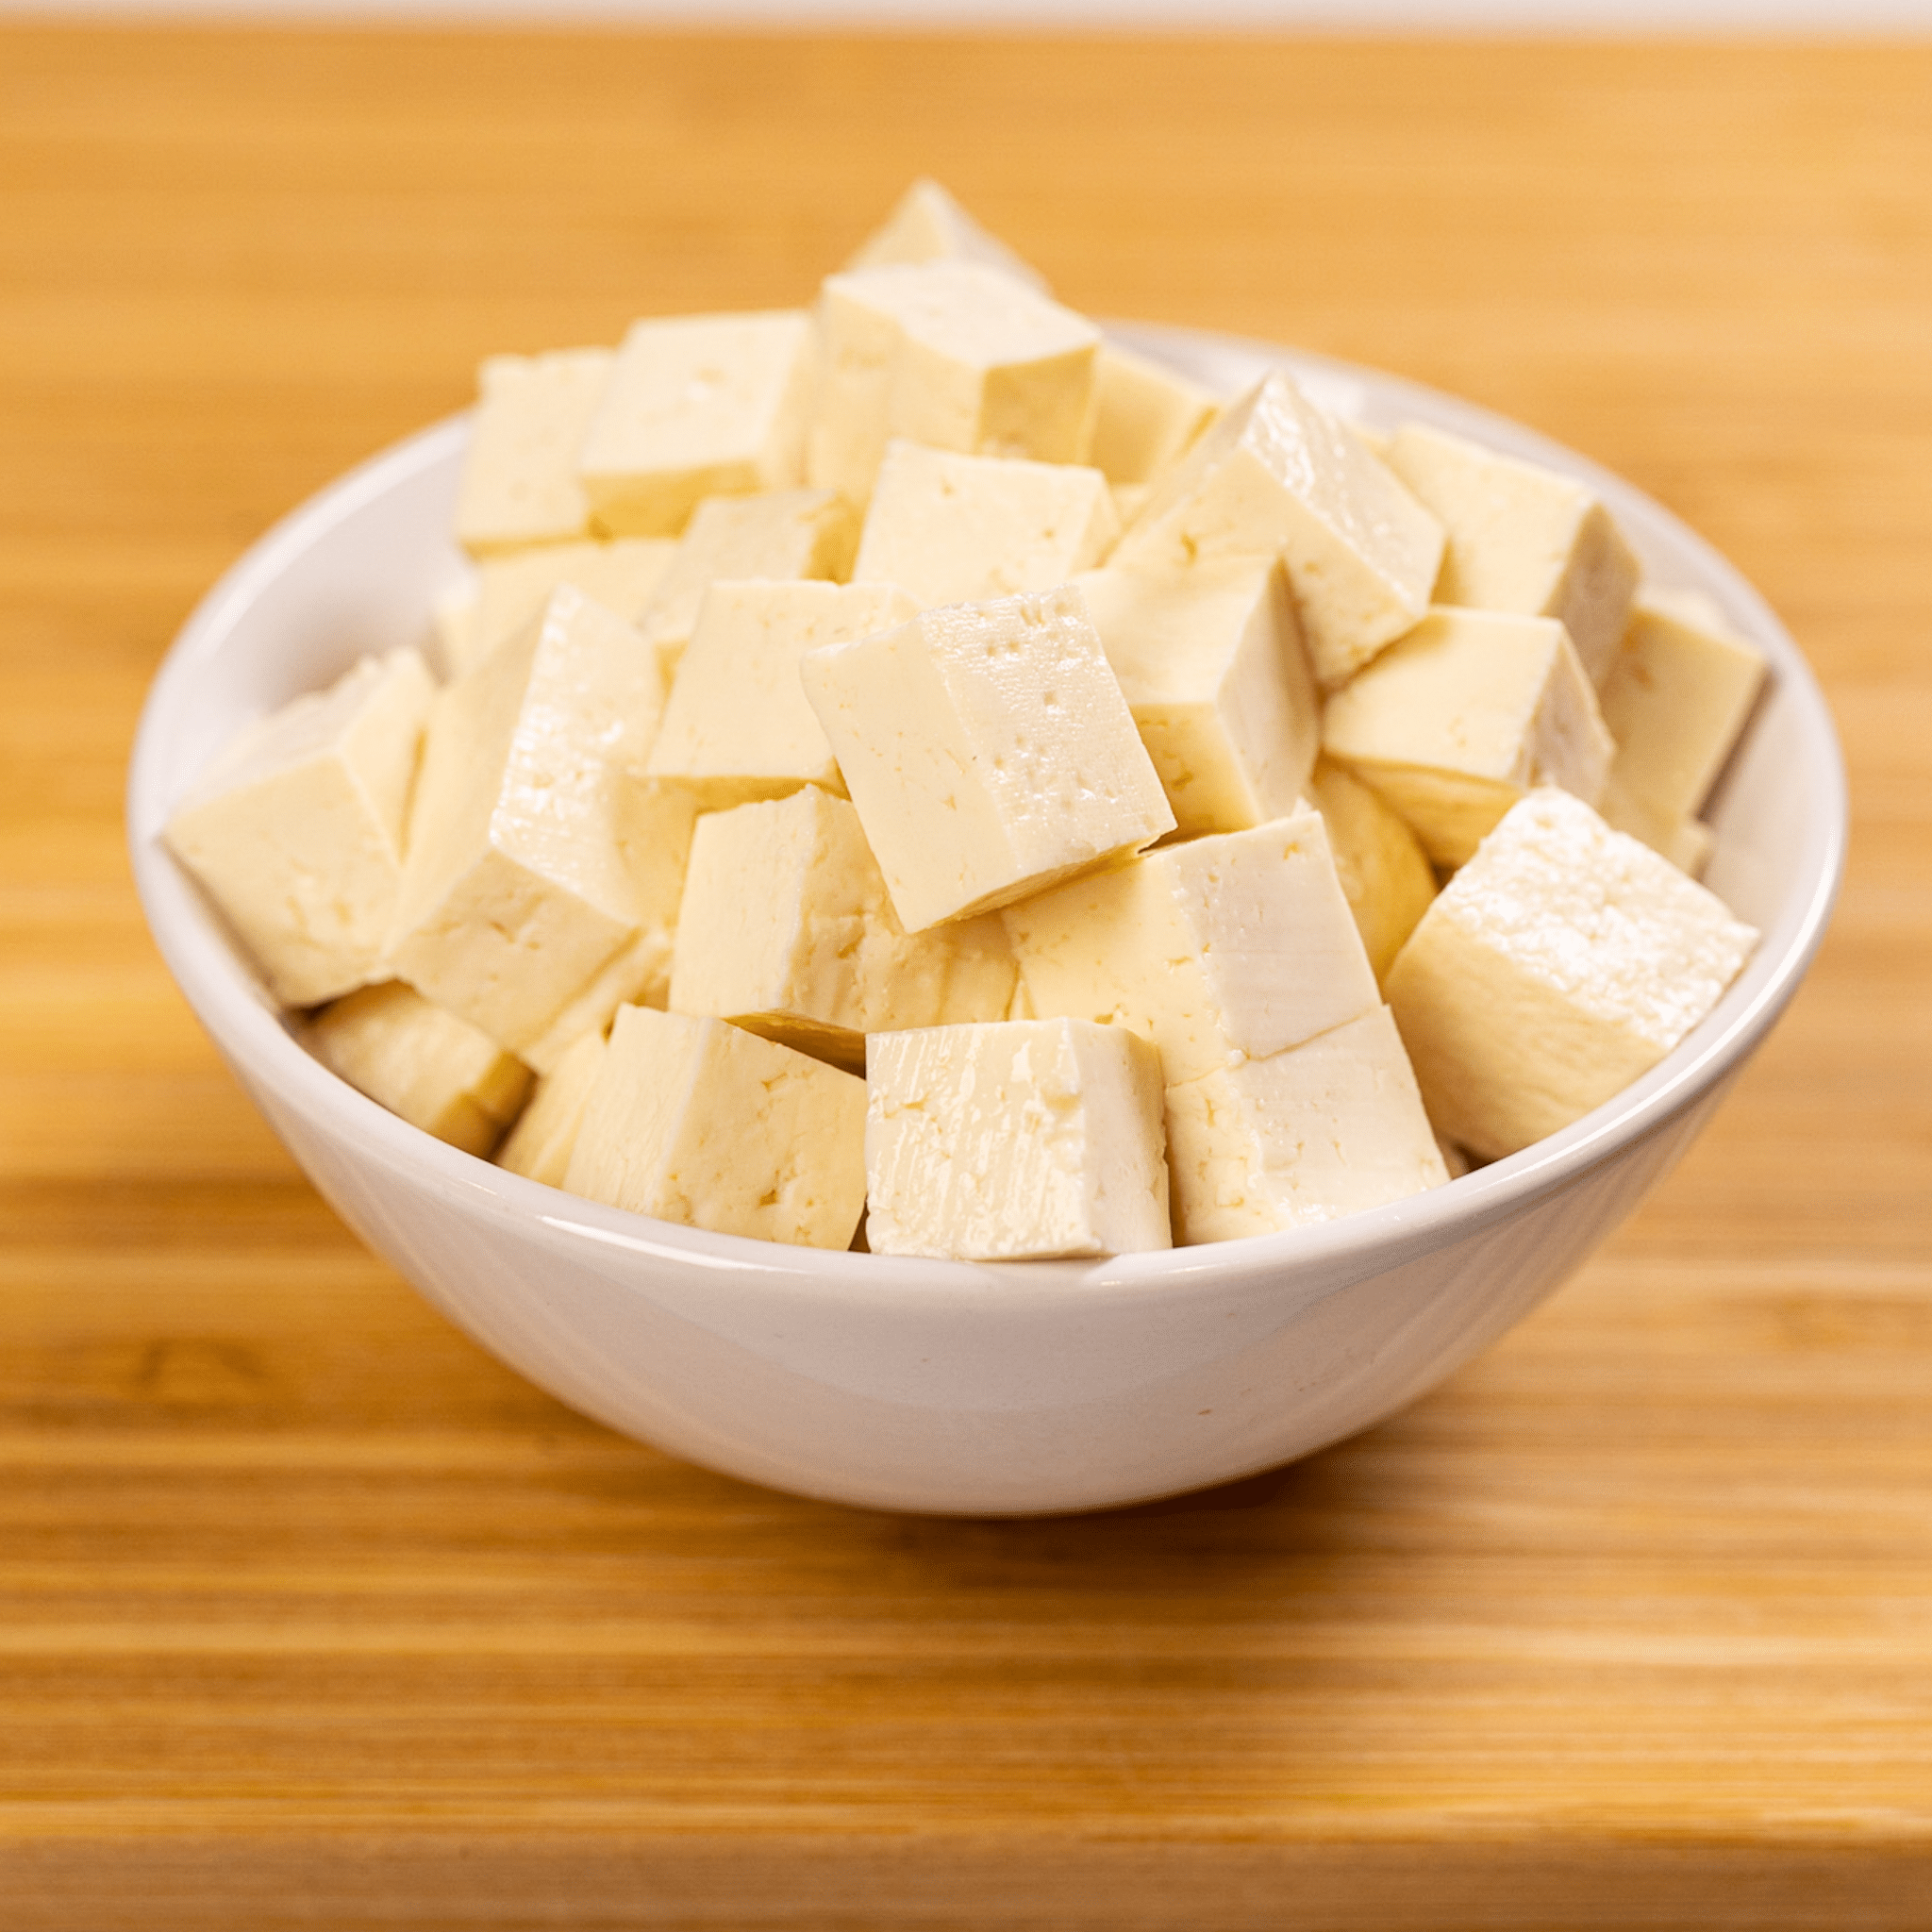 Tofu in a white bowl on a wooden table.